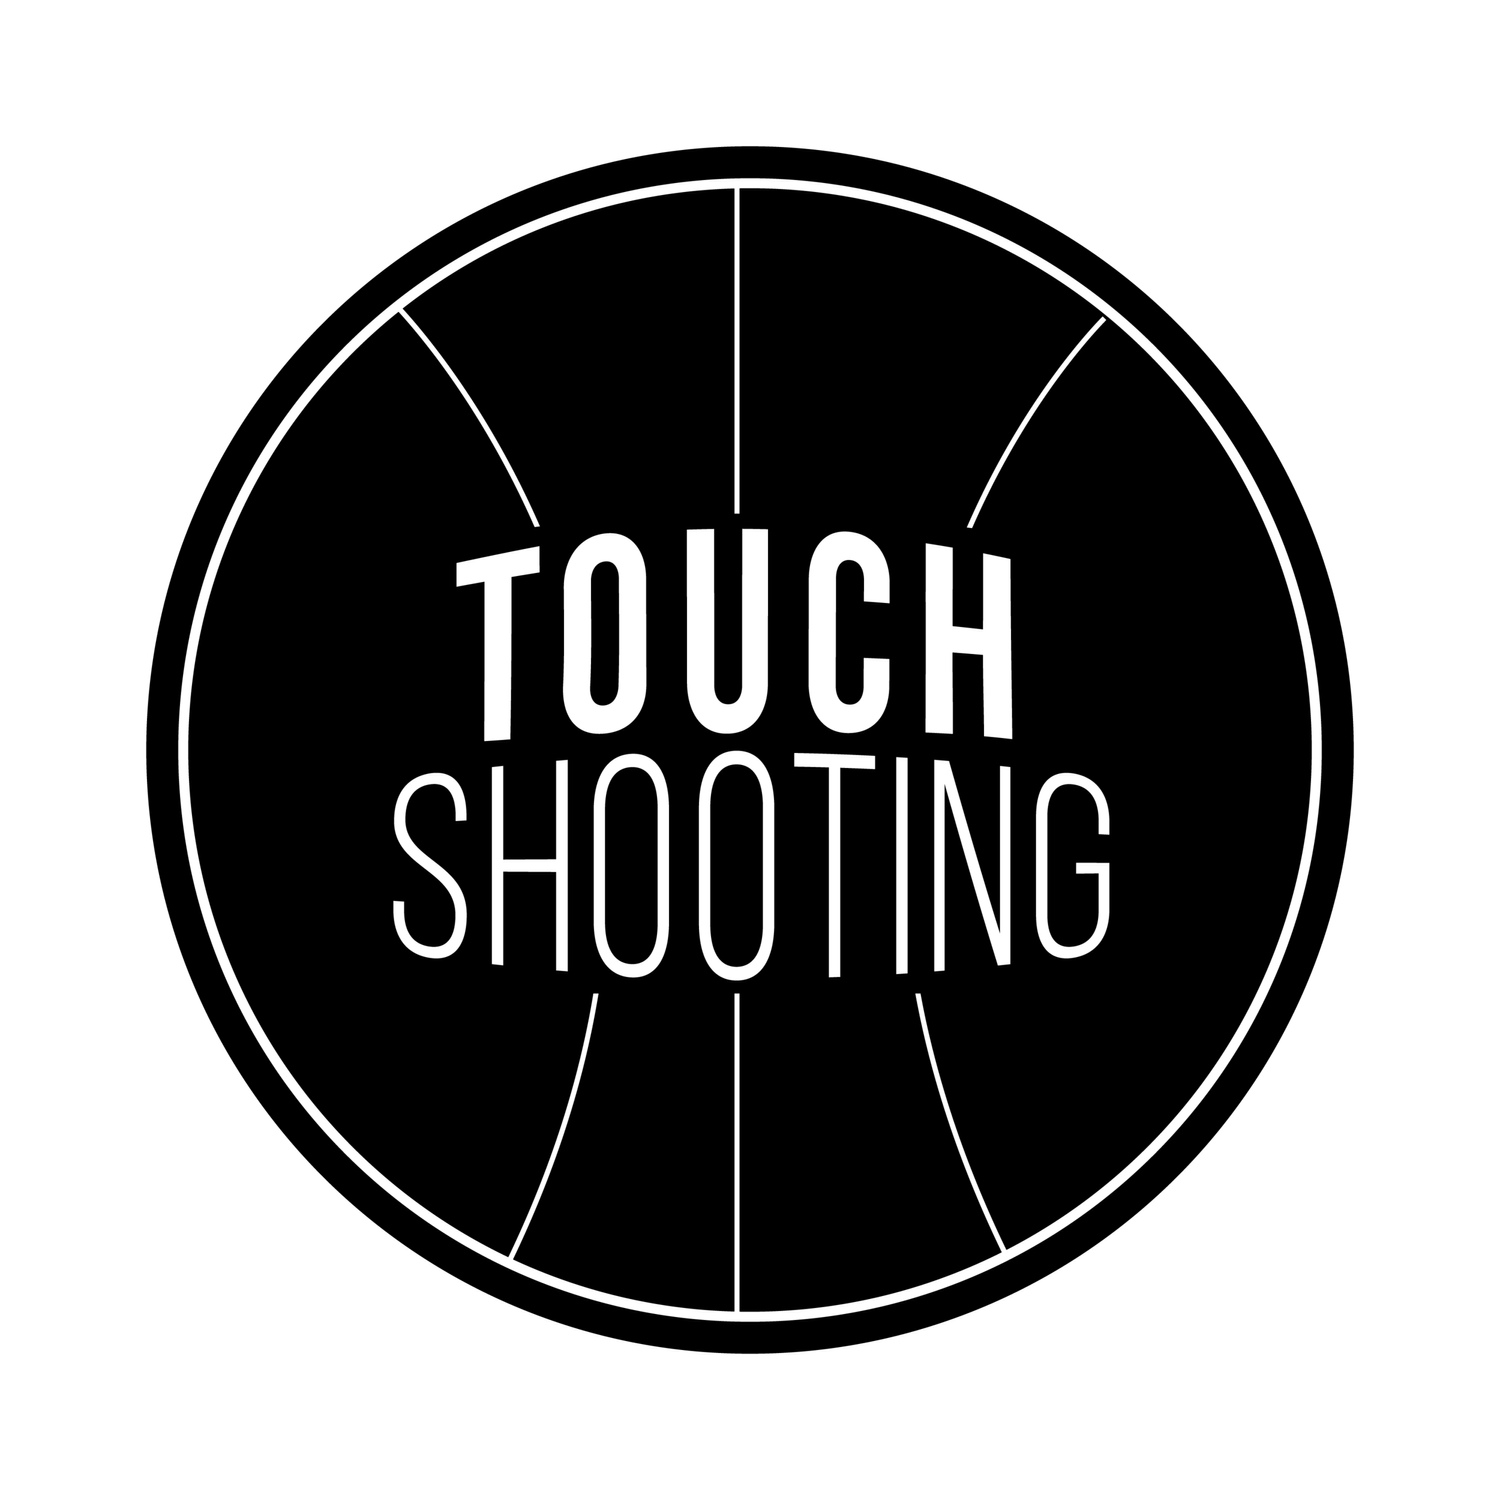 Touch Shooting